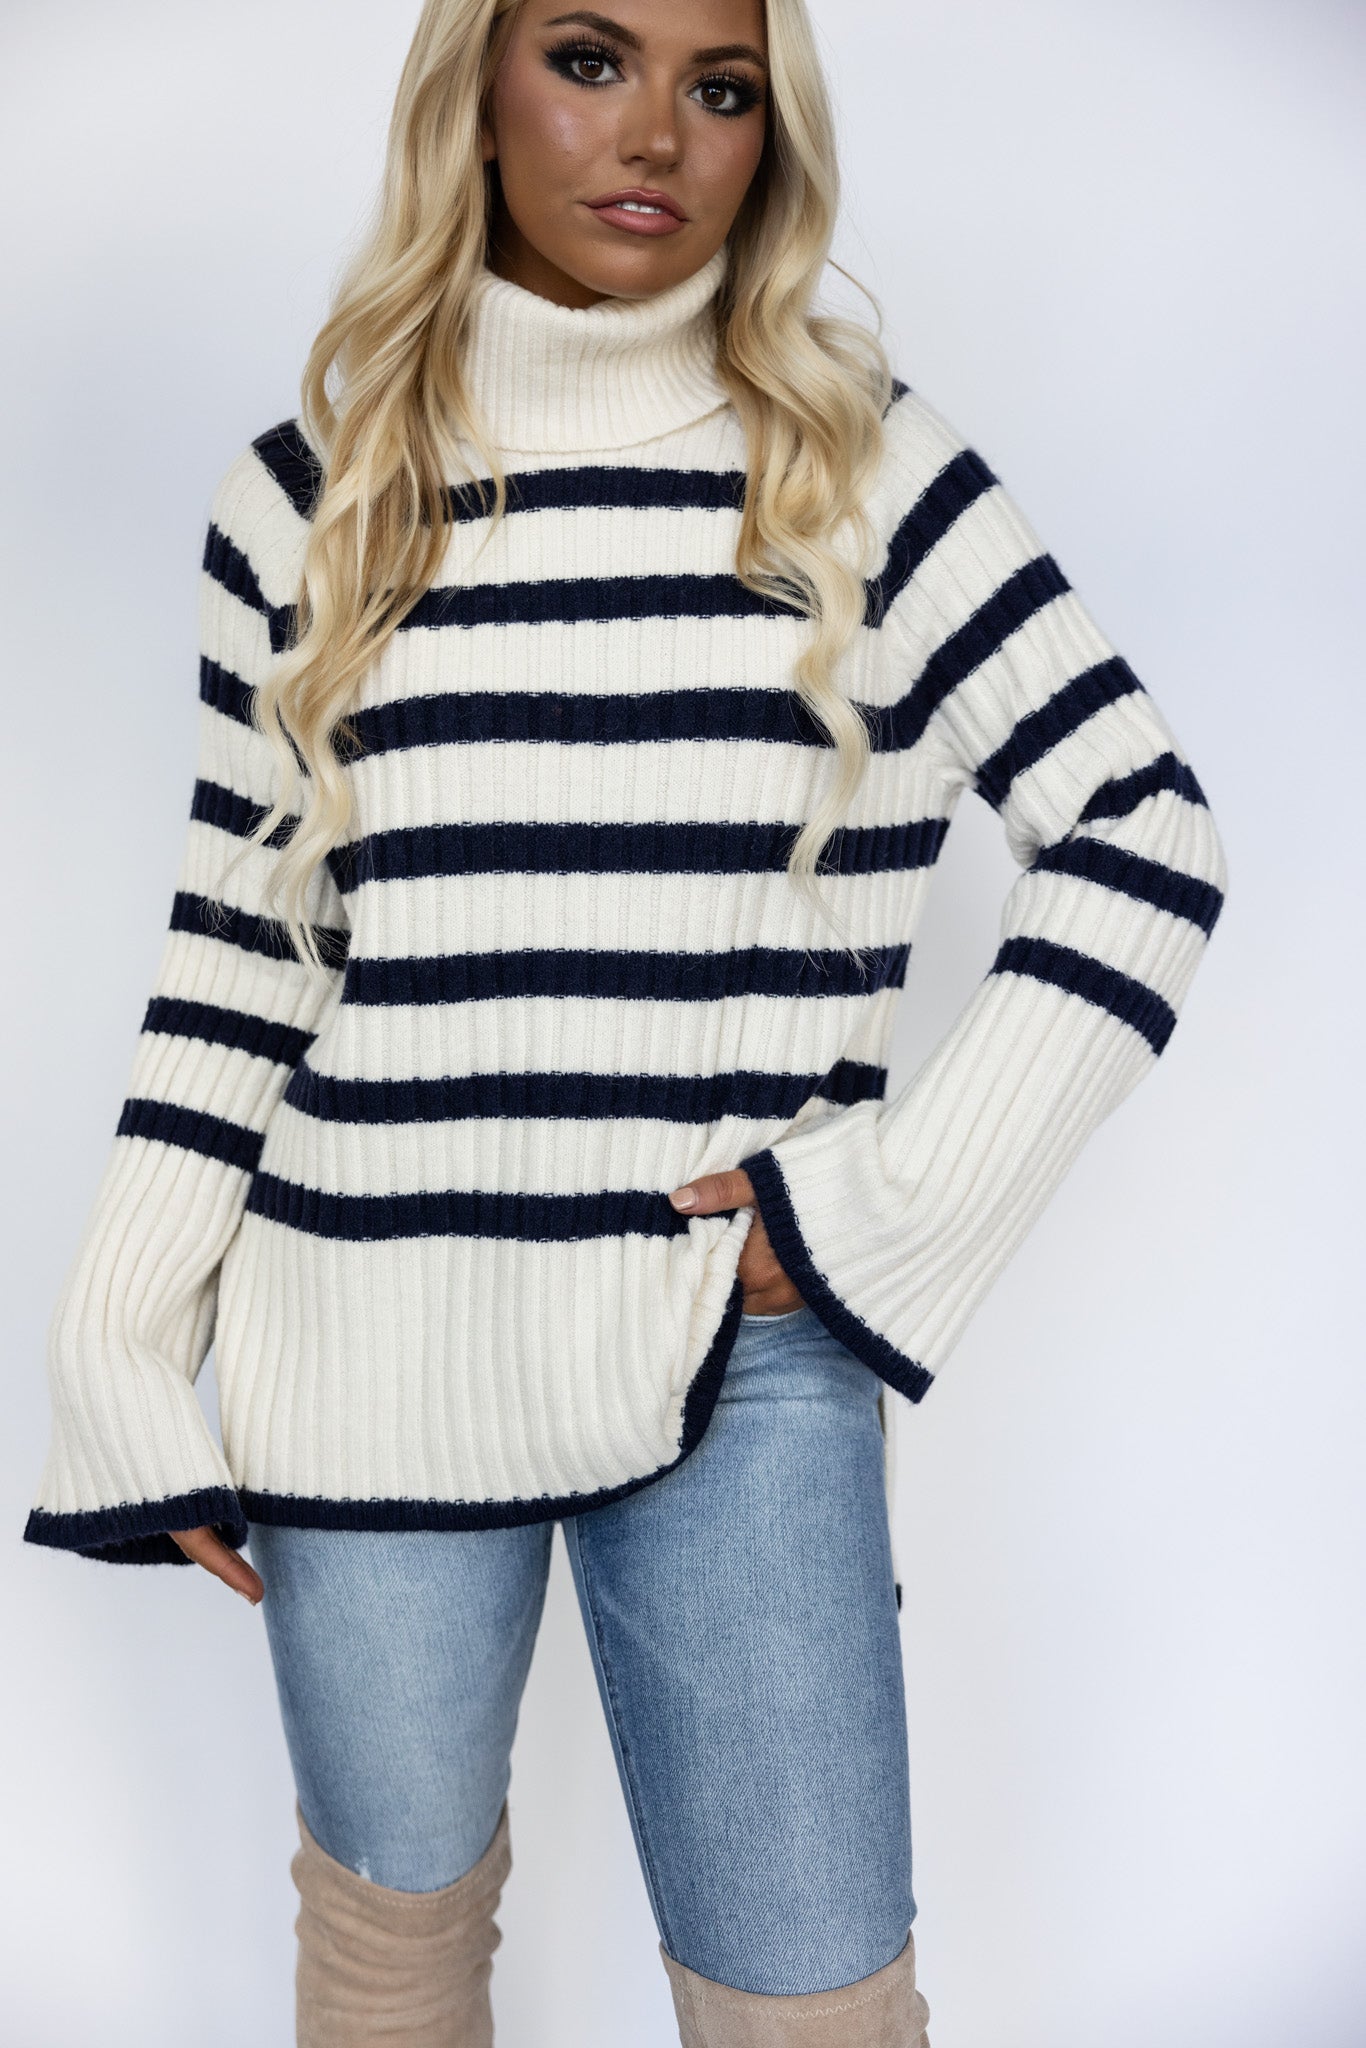 Between The Lines Turtleneck Striped Sweater FINAL SALE